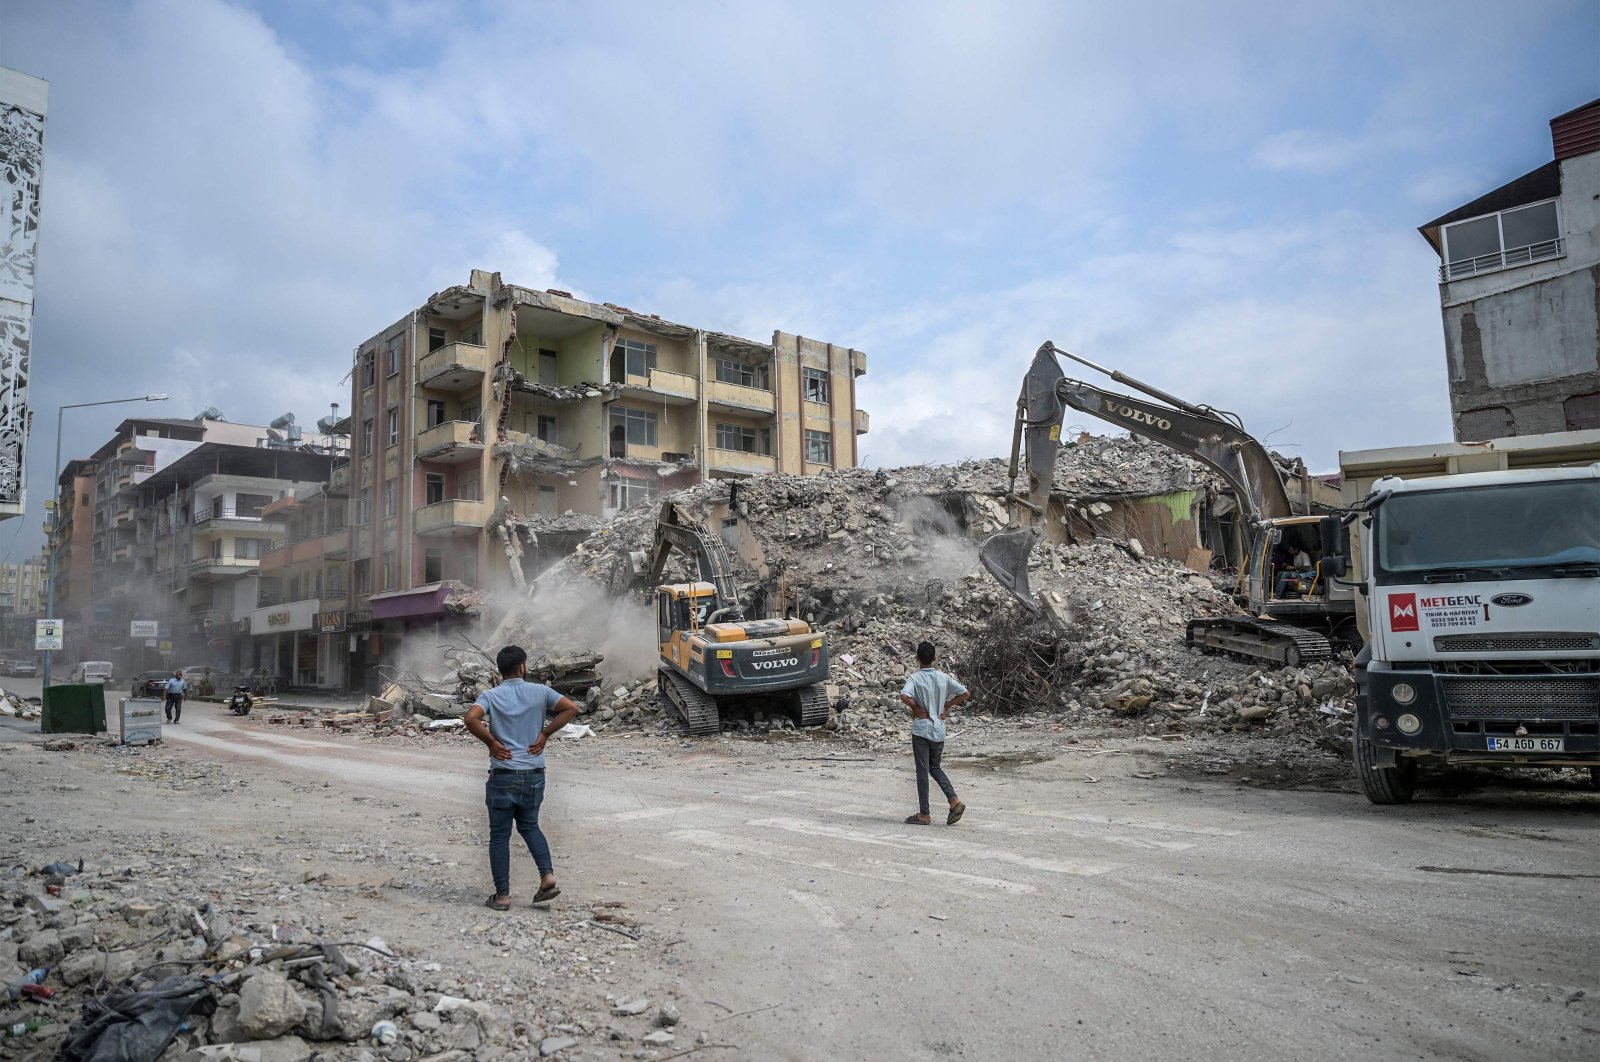 People watch as diggers work to clean the rubble of collapsed buildings, five months after devastating earthquakes hit southeastern Türkiye, in Samandağ, Hatay, July 9, 2023. (AFP Photo)